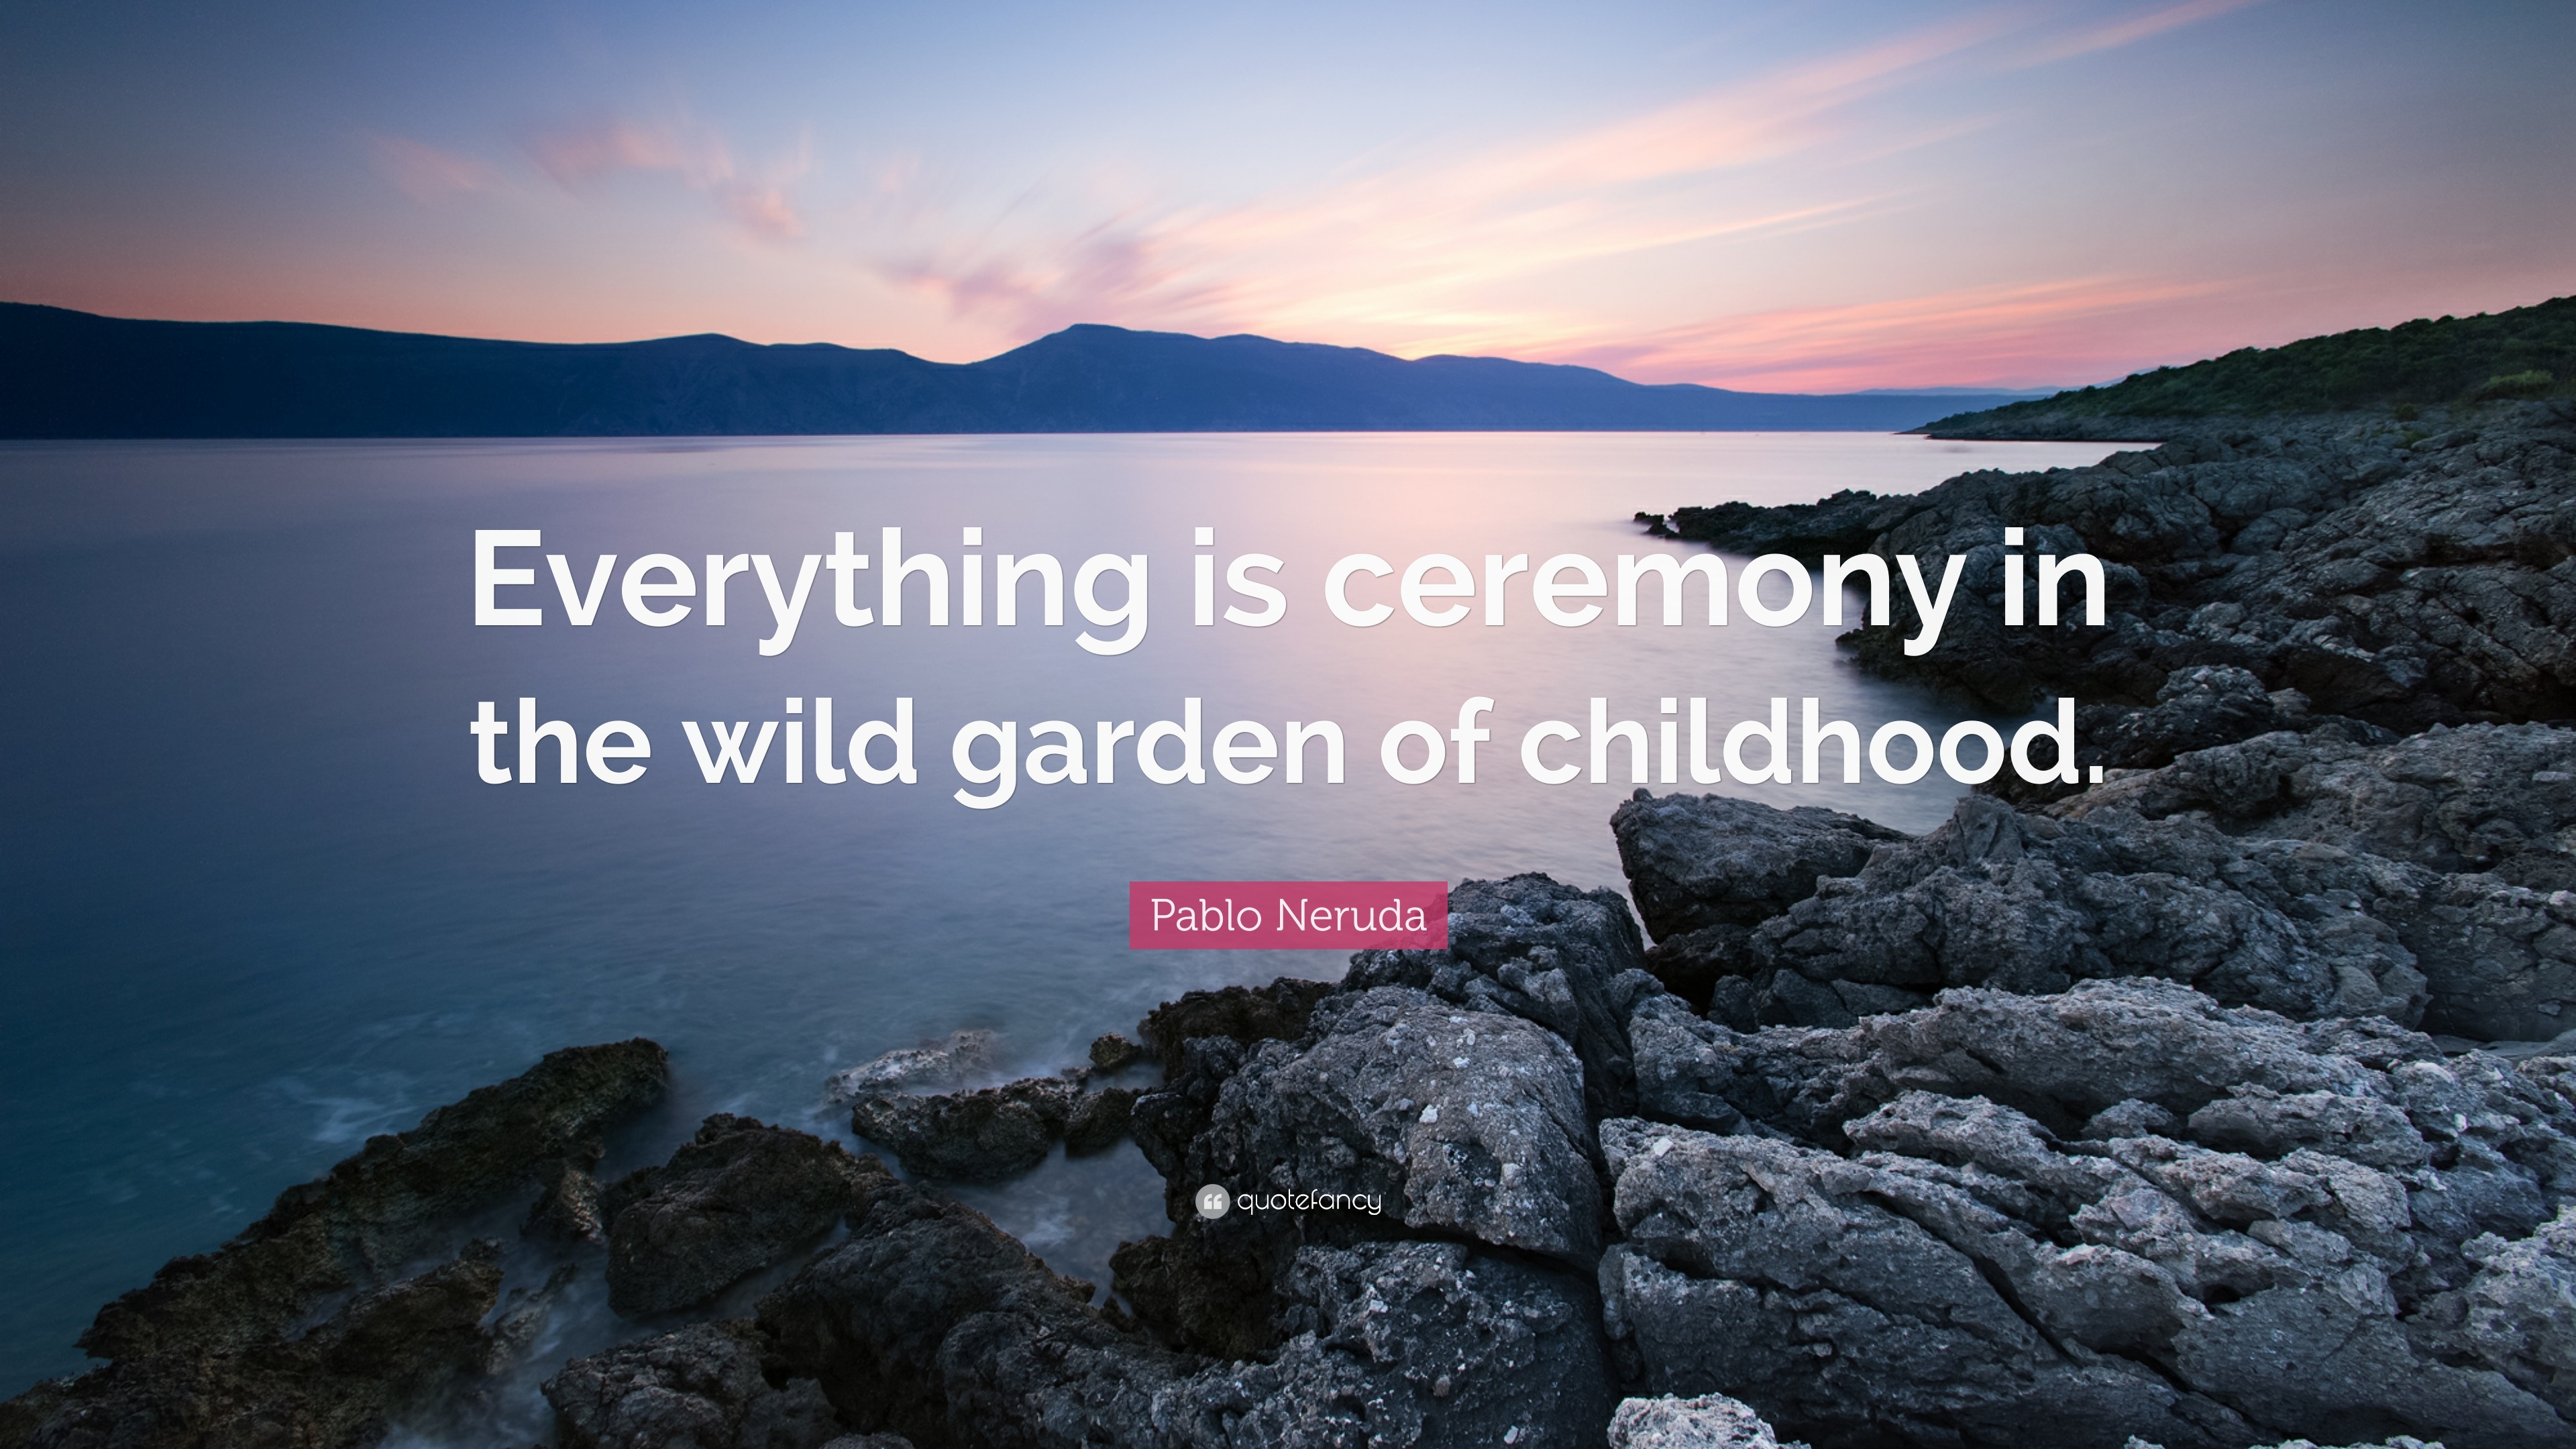 Pablo Neruda Quote Everything Is Ceremony In The Wild Garden Of Childhood 12 Wallpapers Quotefancy